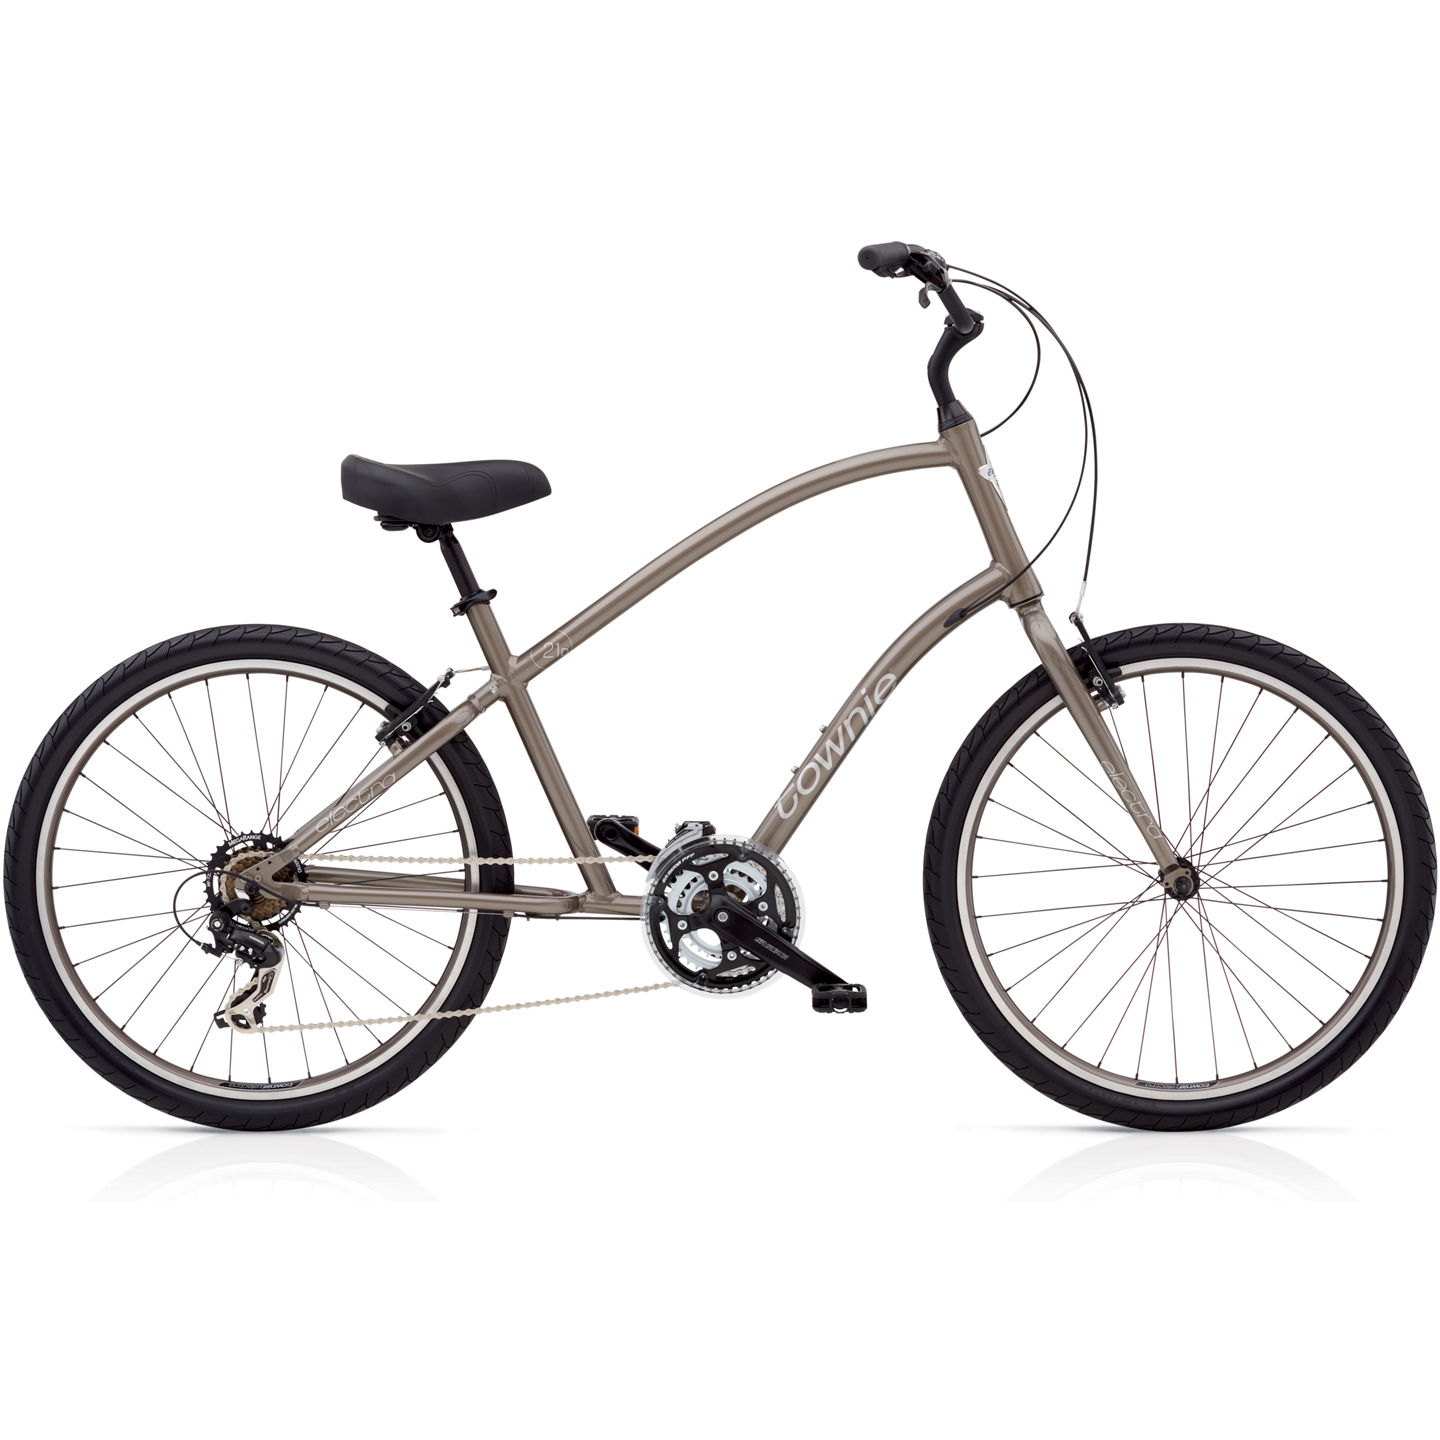 electra townie reviews